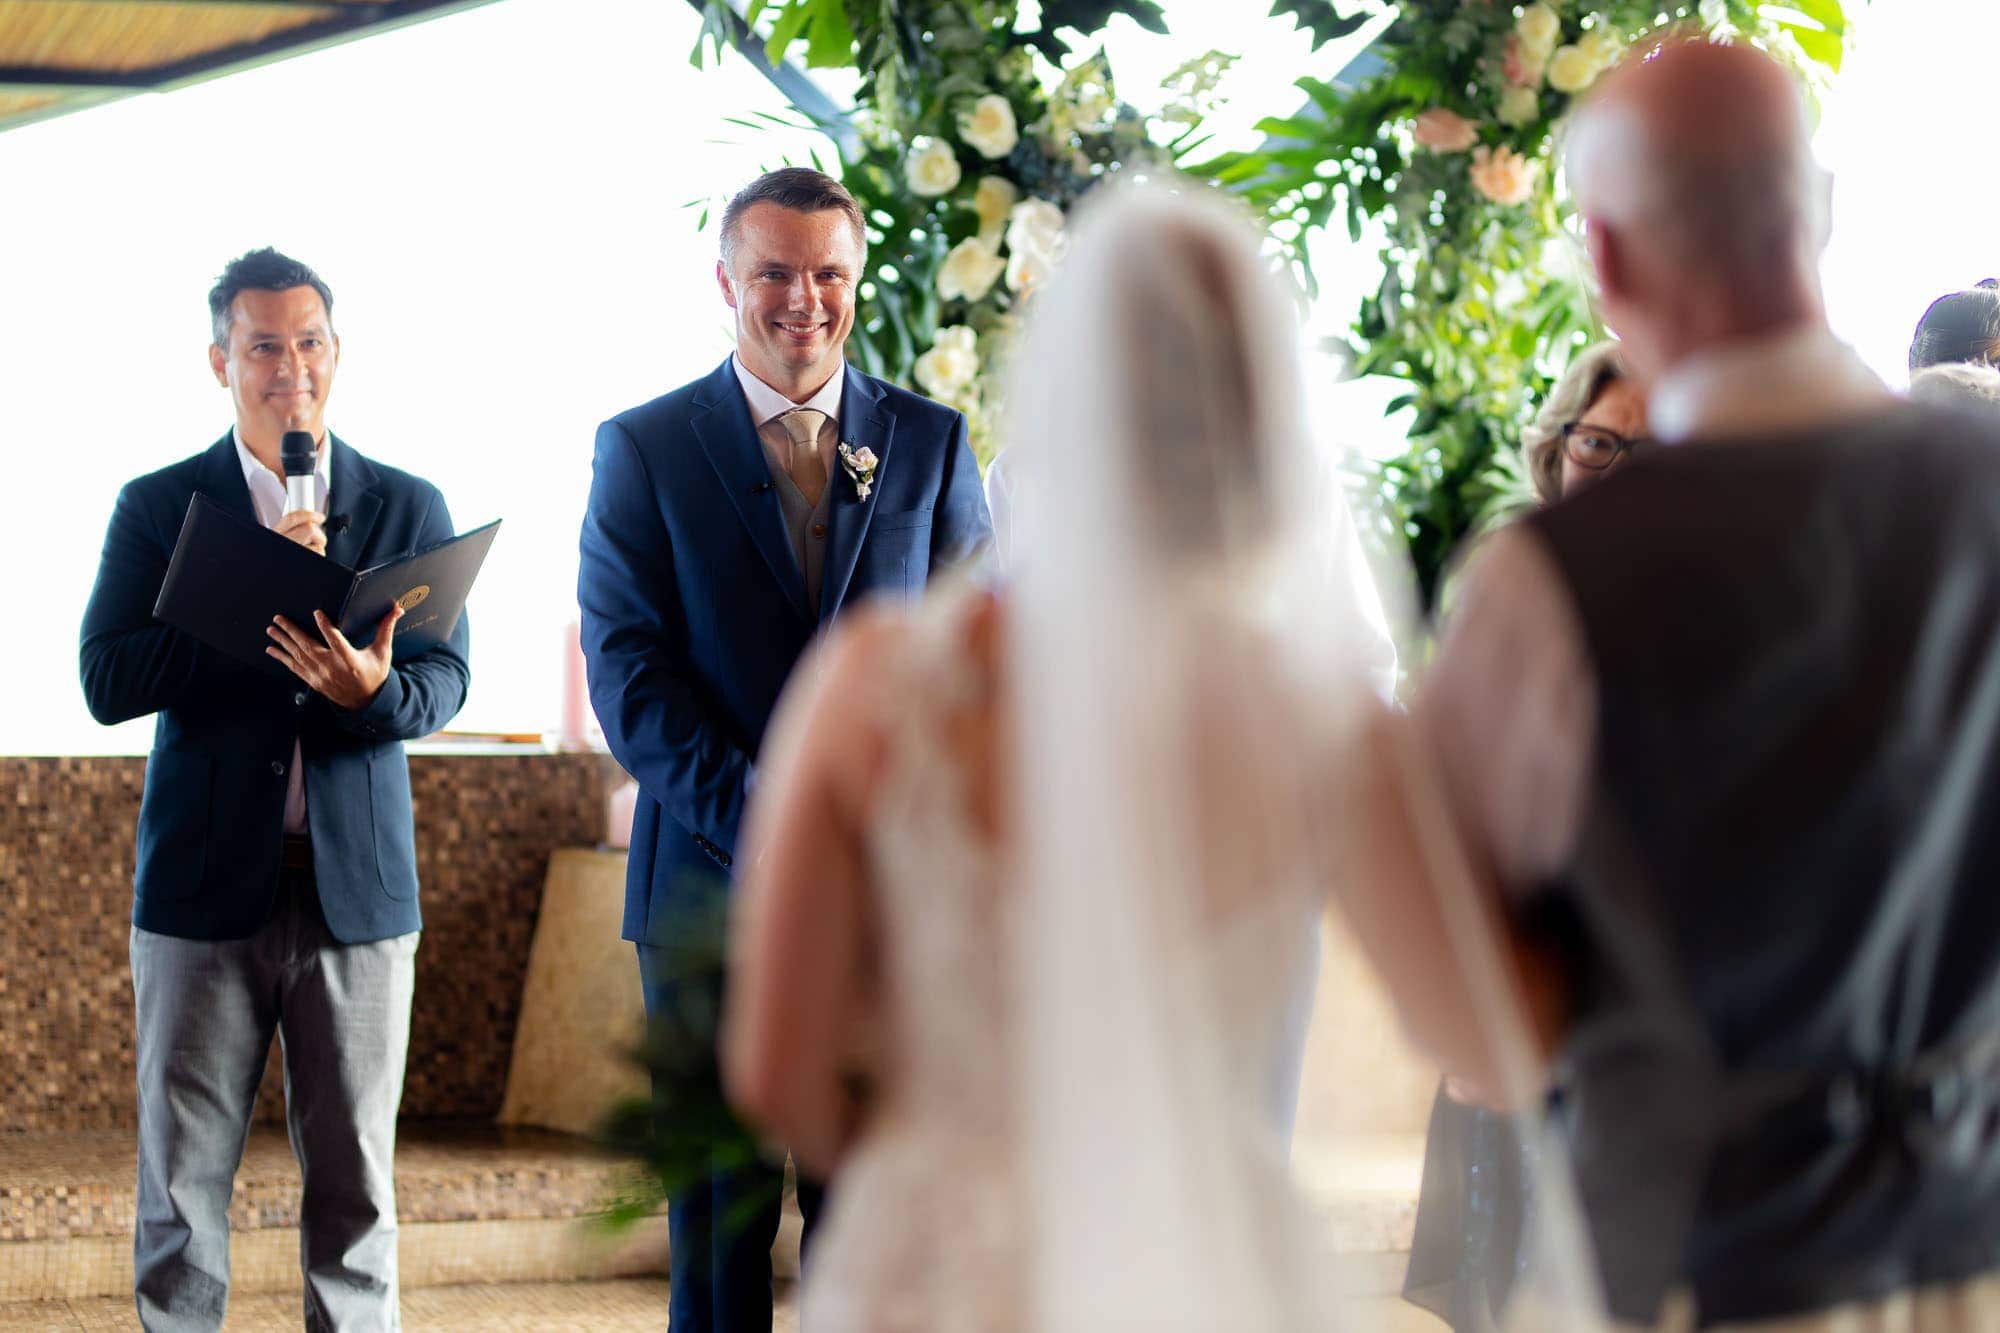 second photographer angle of groom seeing bride walk down aisle